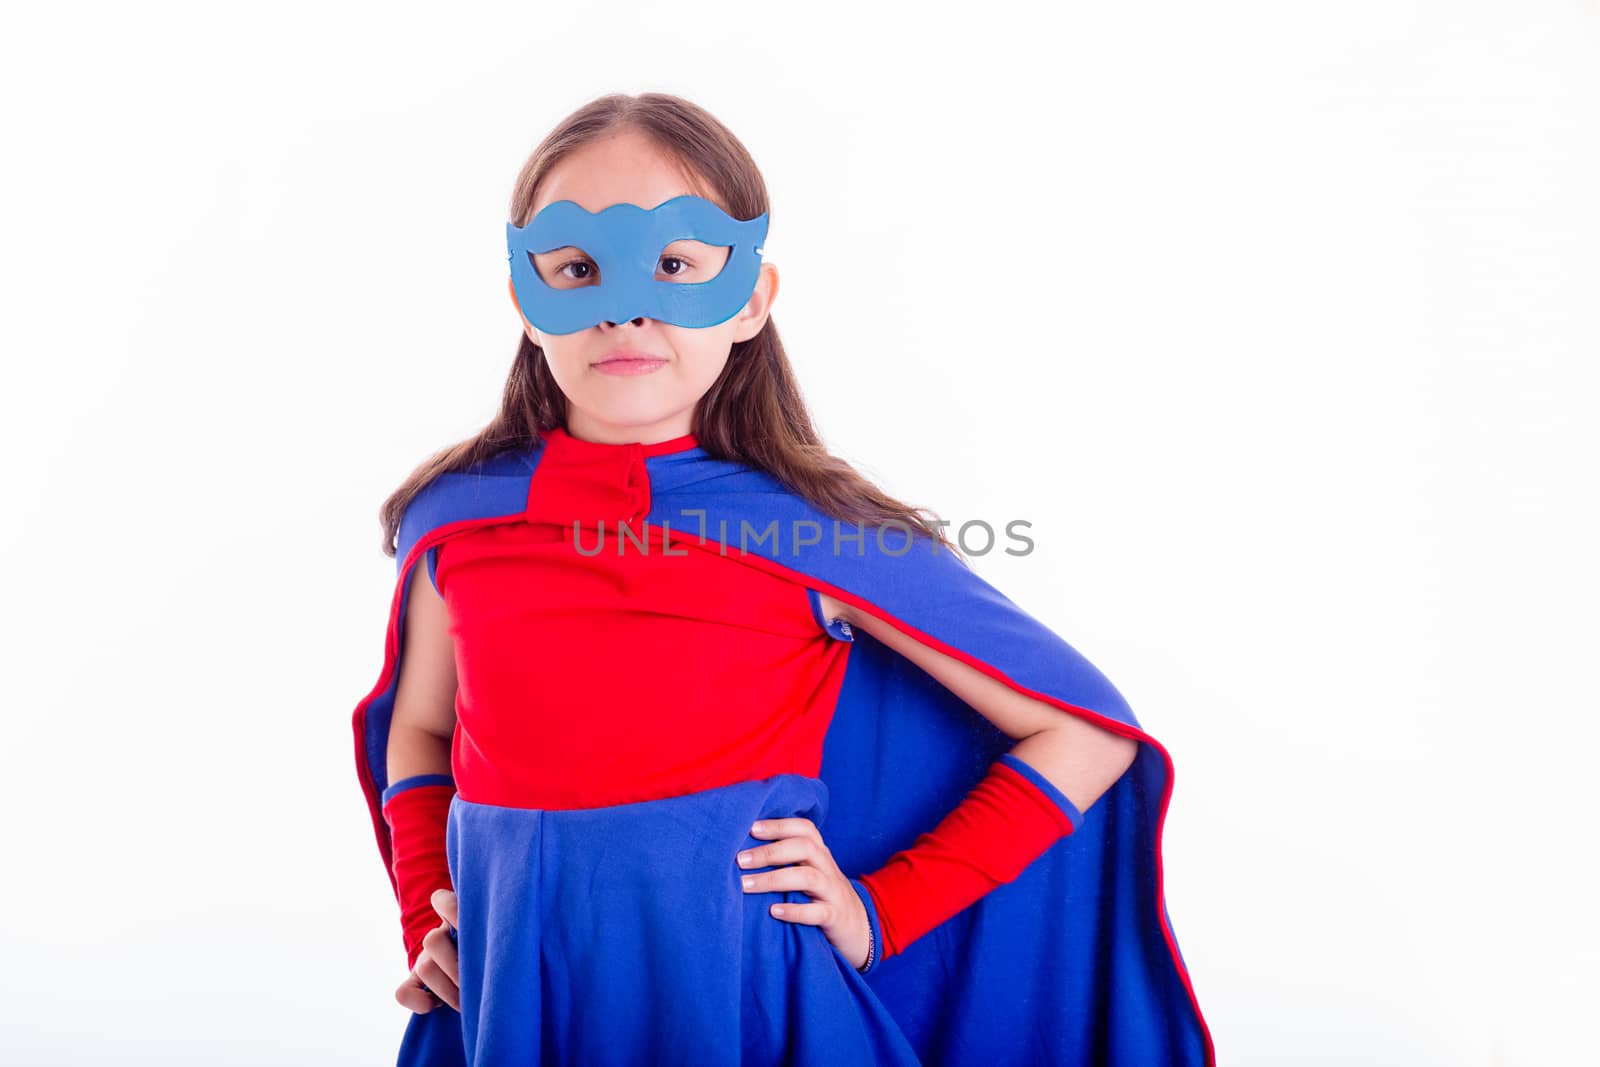 Girl in blue and red superhero costume with hands on hips